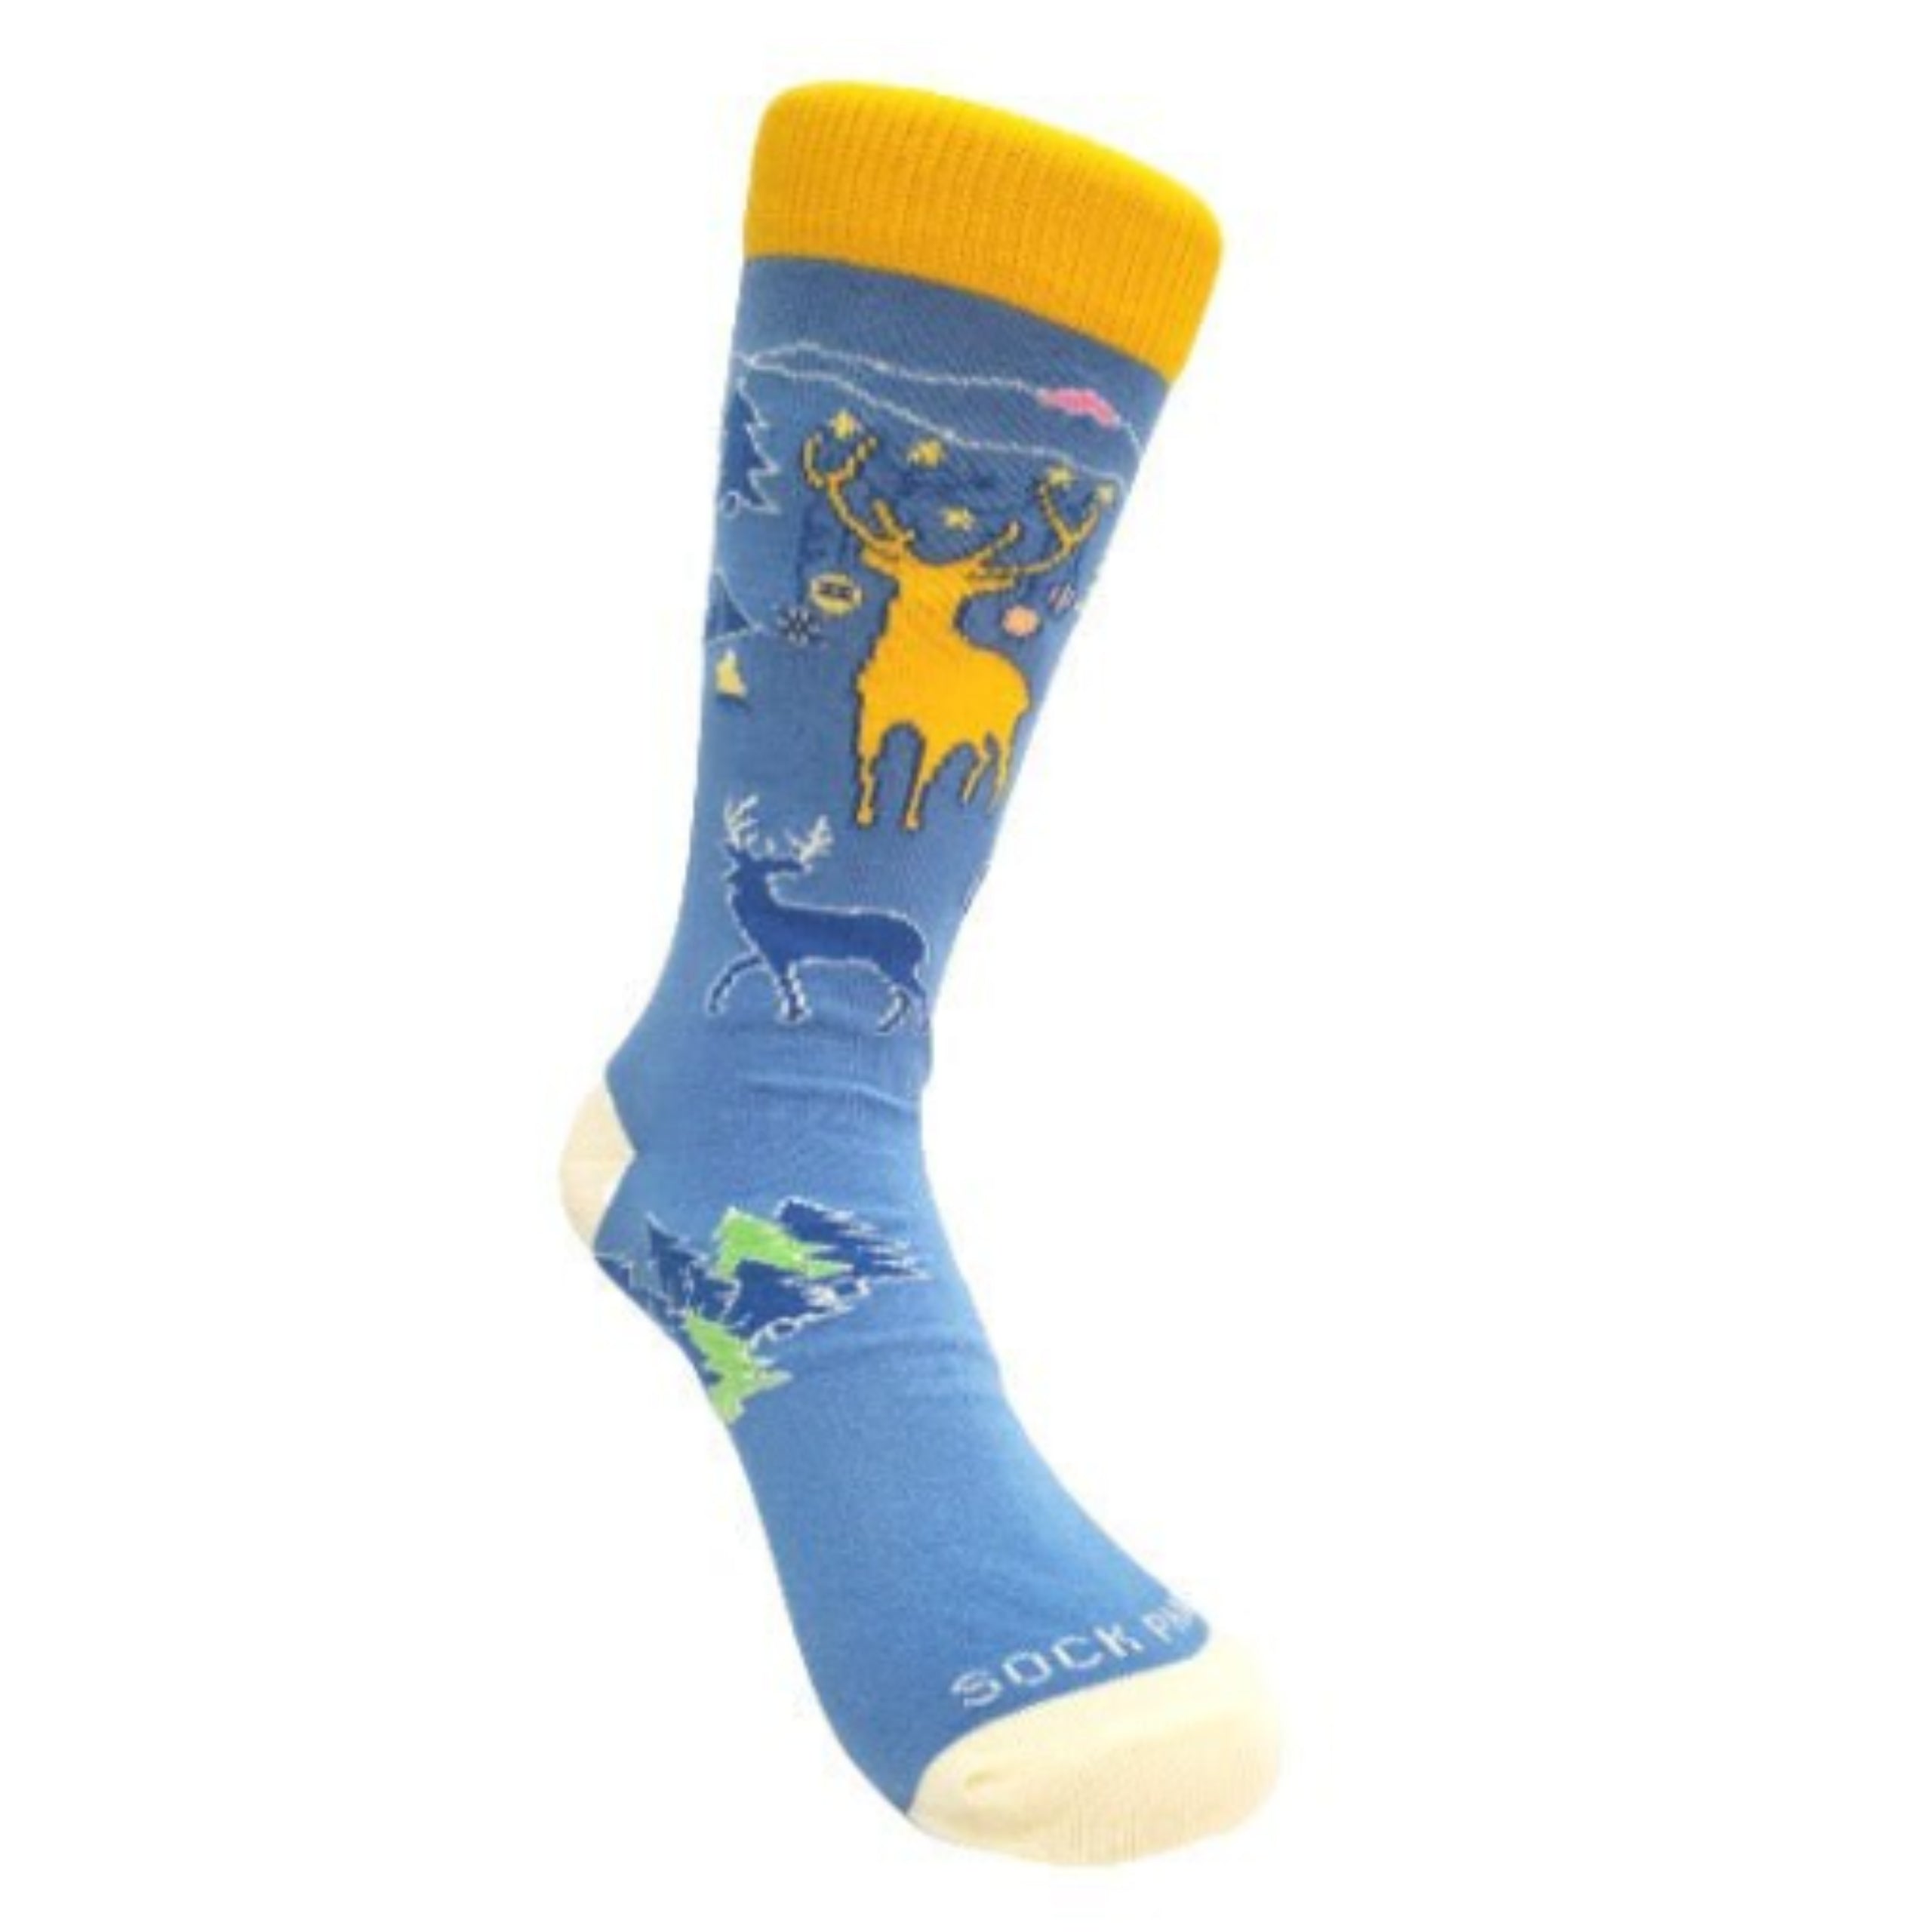 Reindeer Campgrounds in the Mountains Holiday Socks (Adult Small)